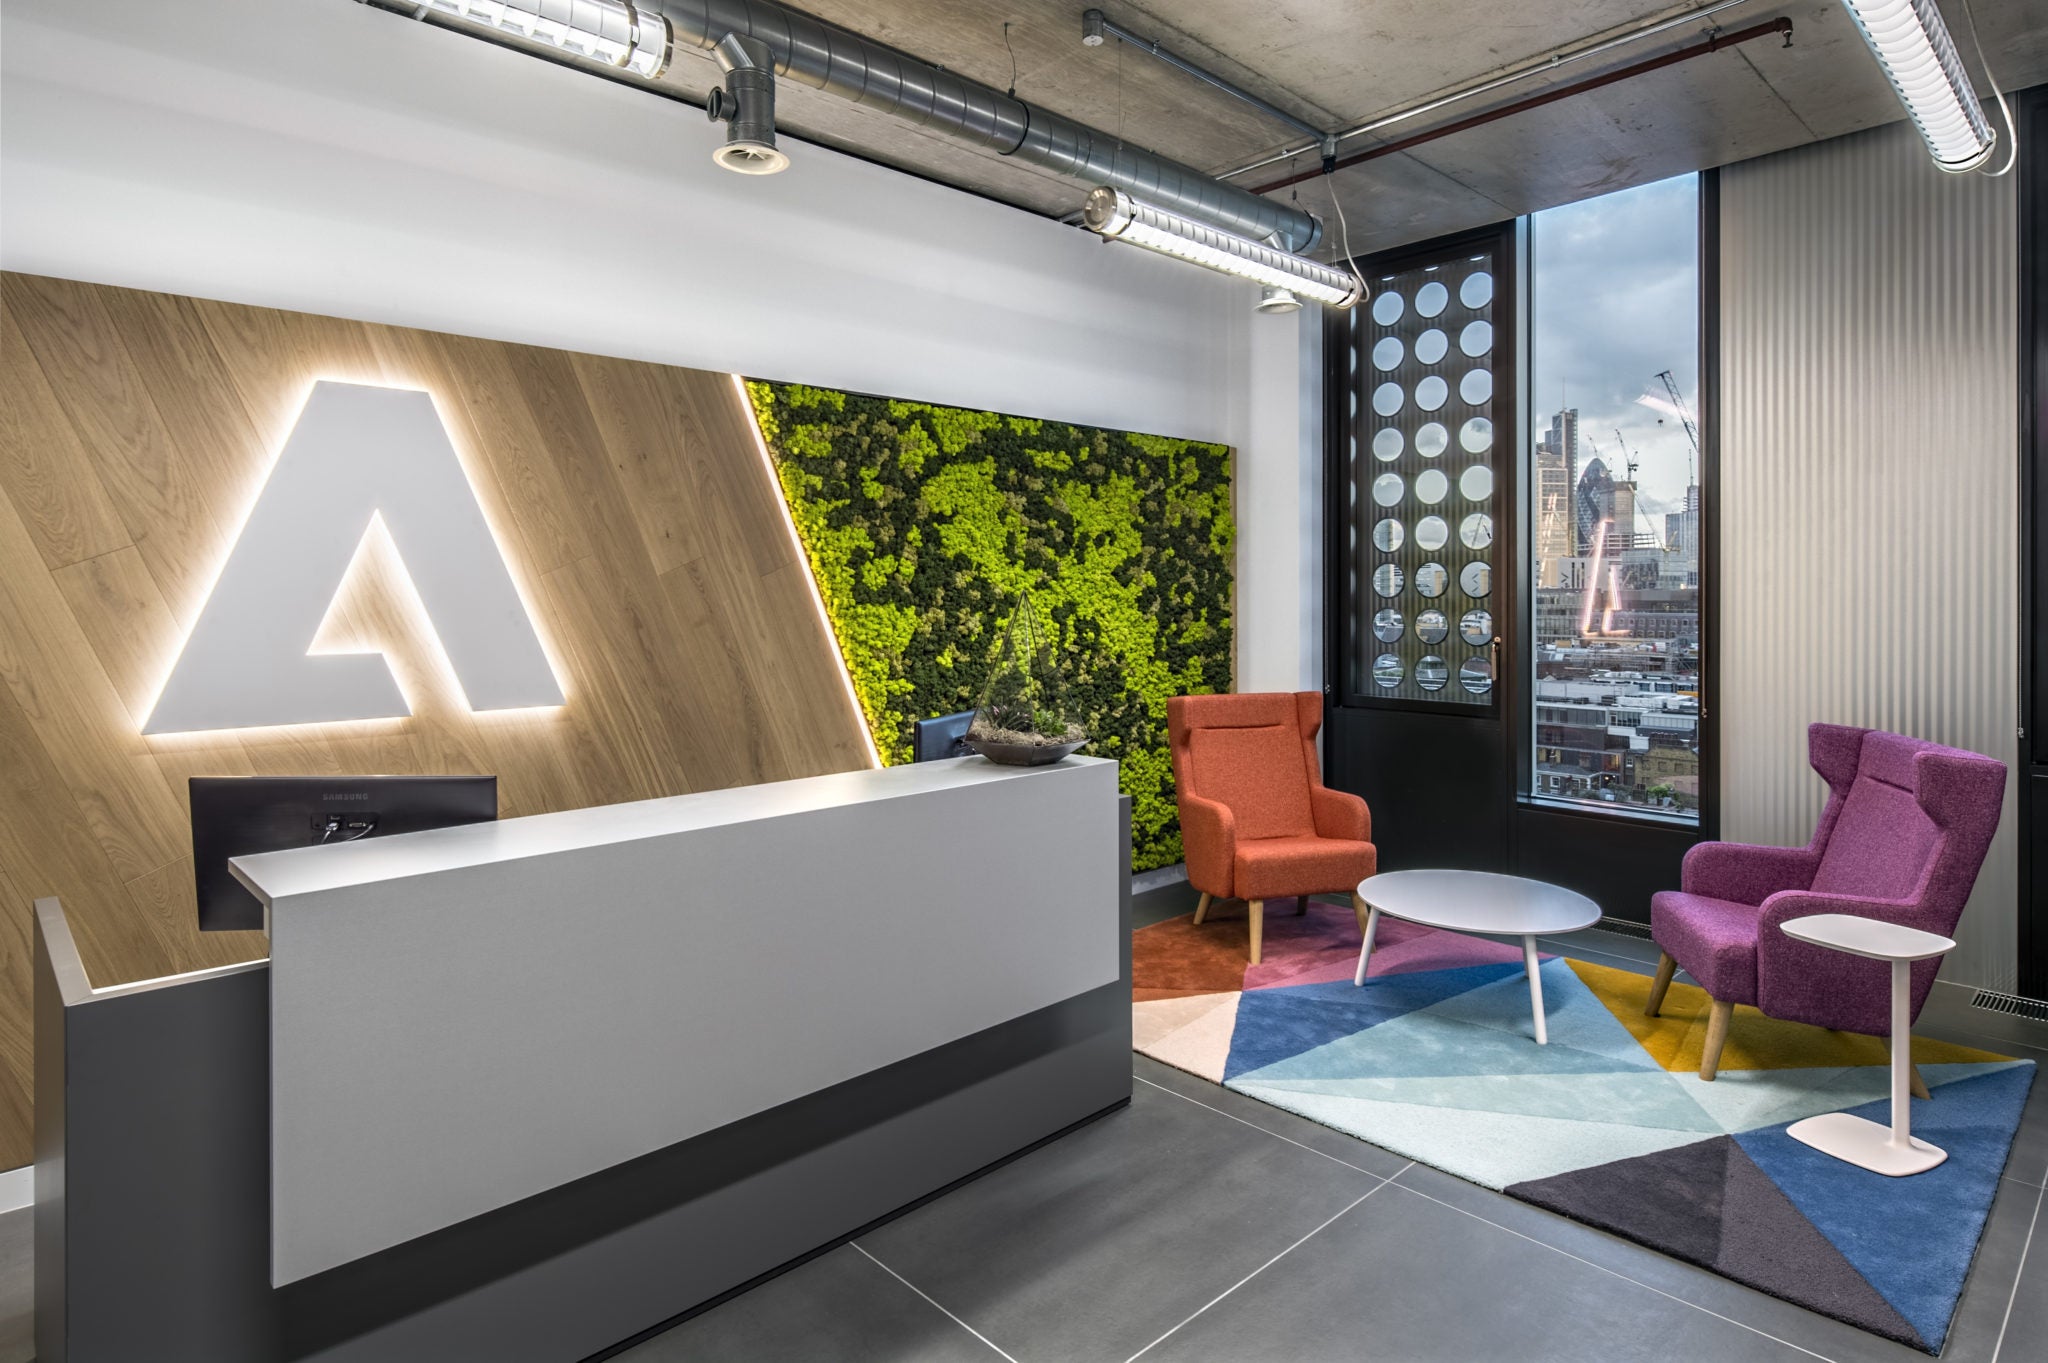 Adobe commits to UK tech sector with new flagship office